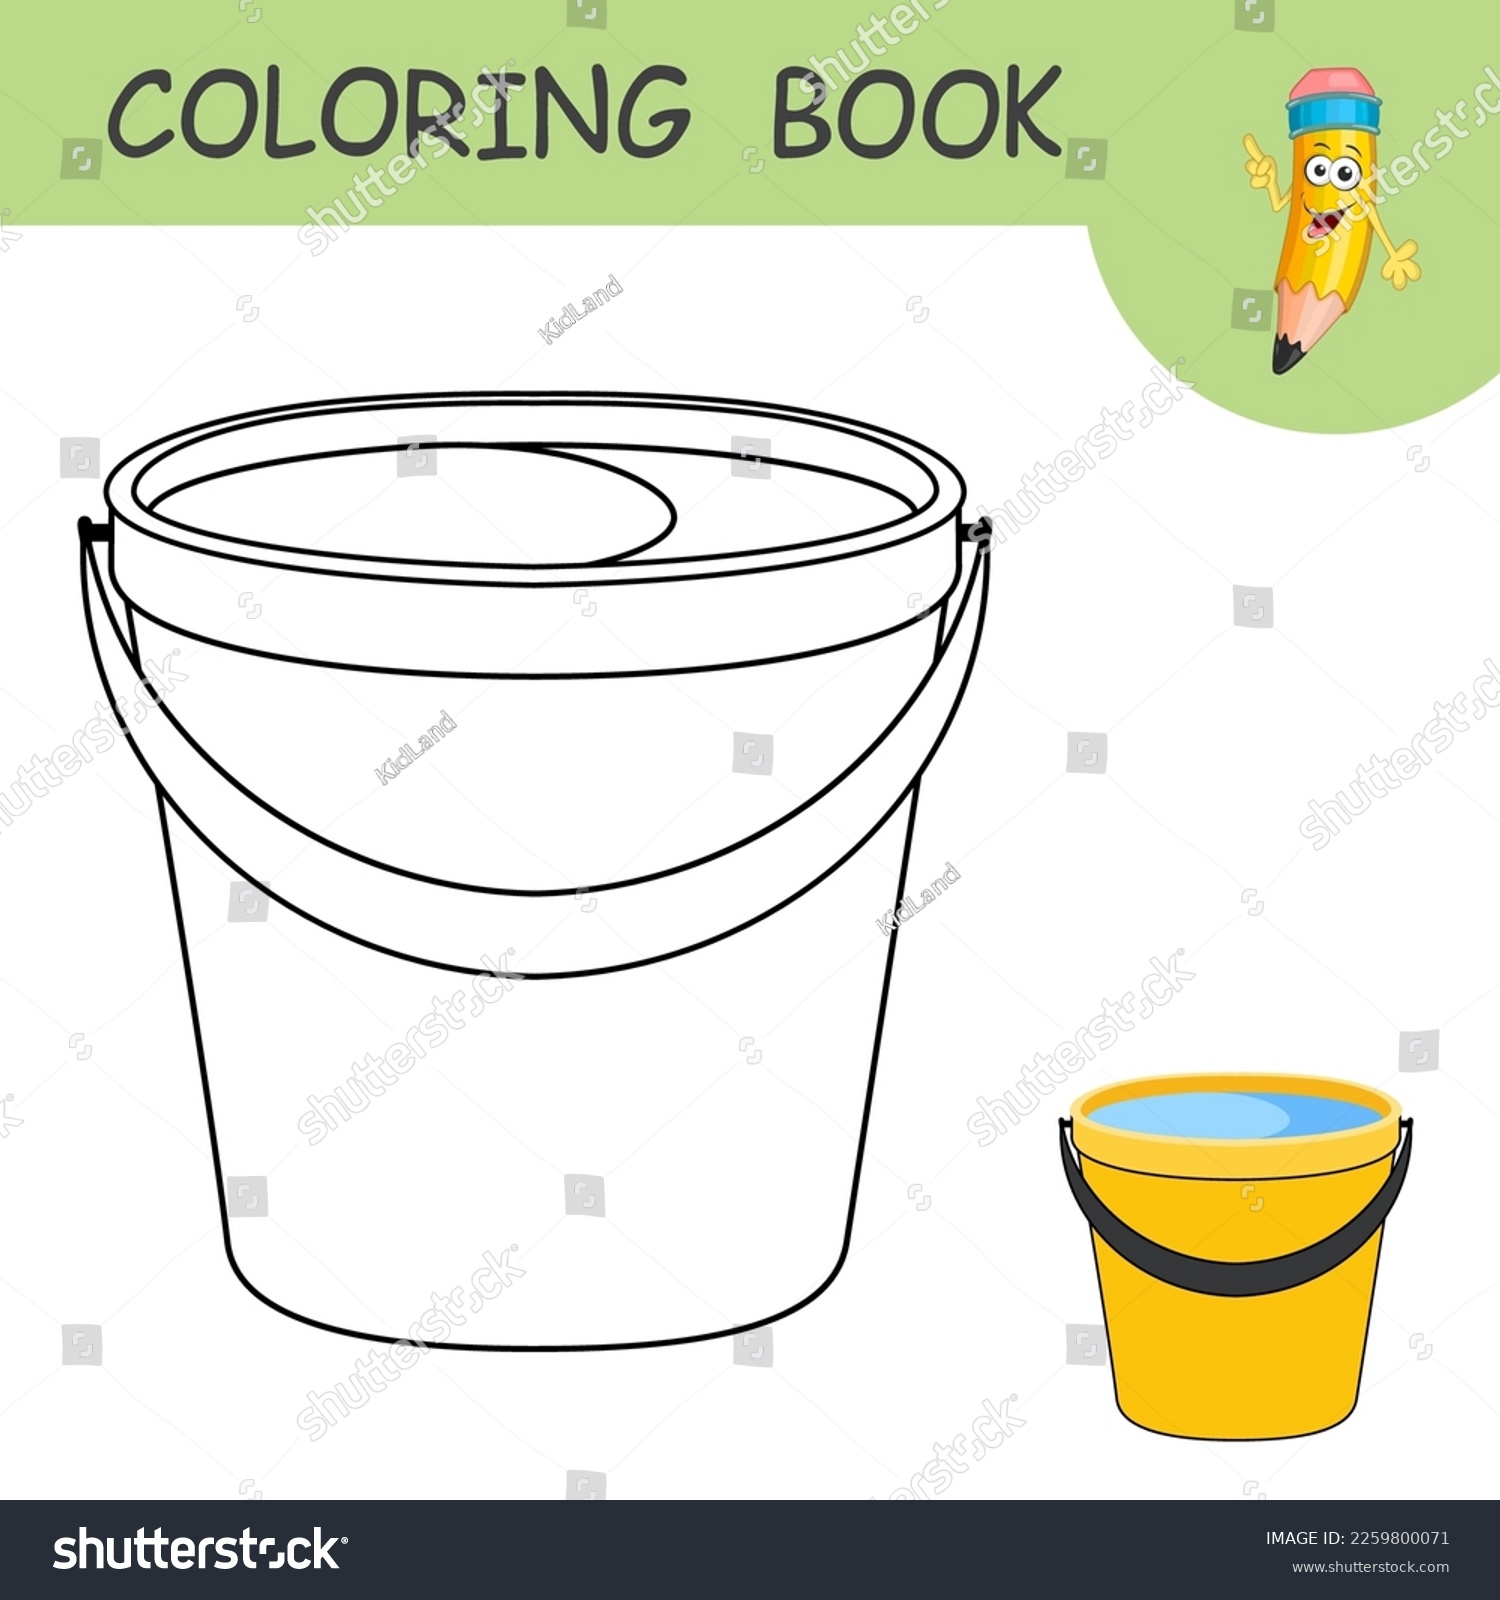 Cartoon bucket filled water template colorless àààààààààªàààà àààààààààààªààààà